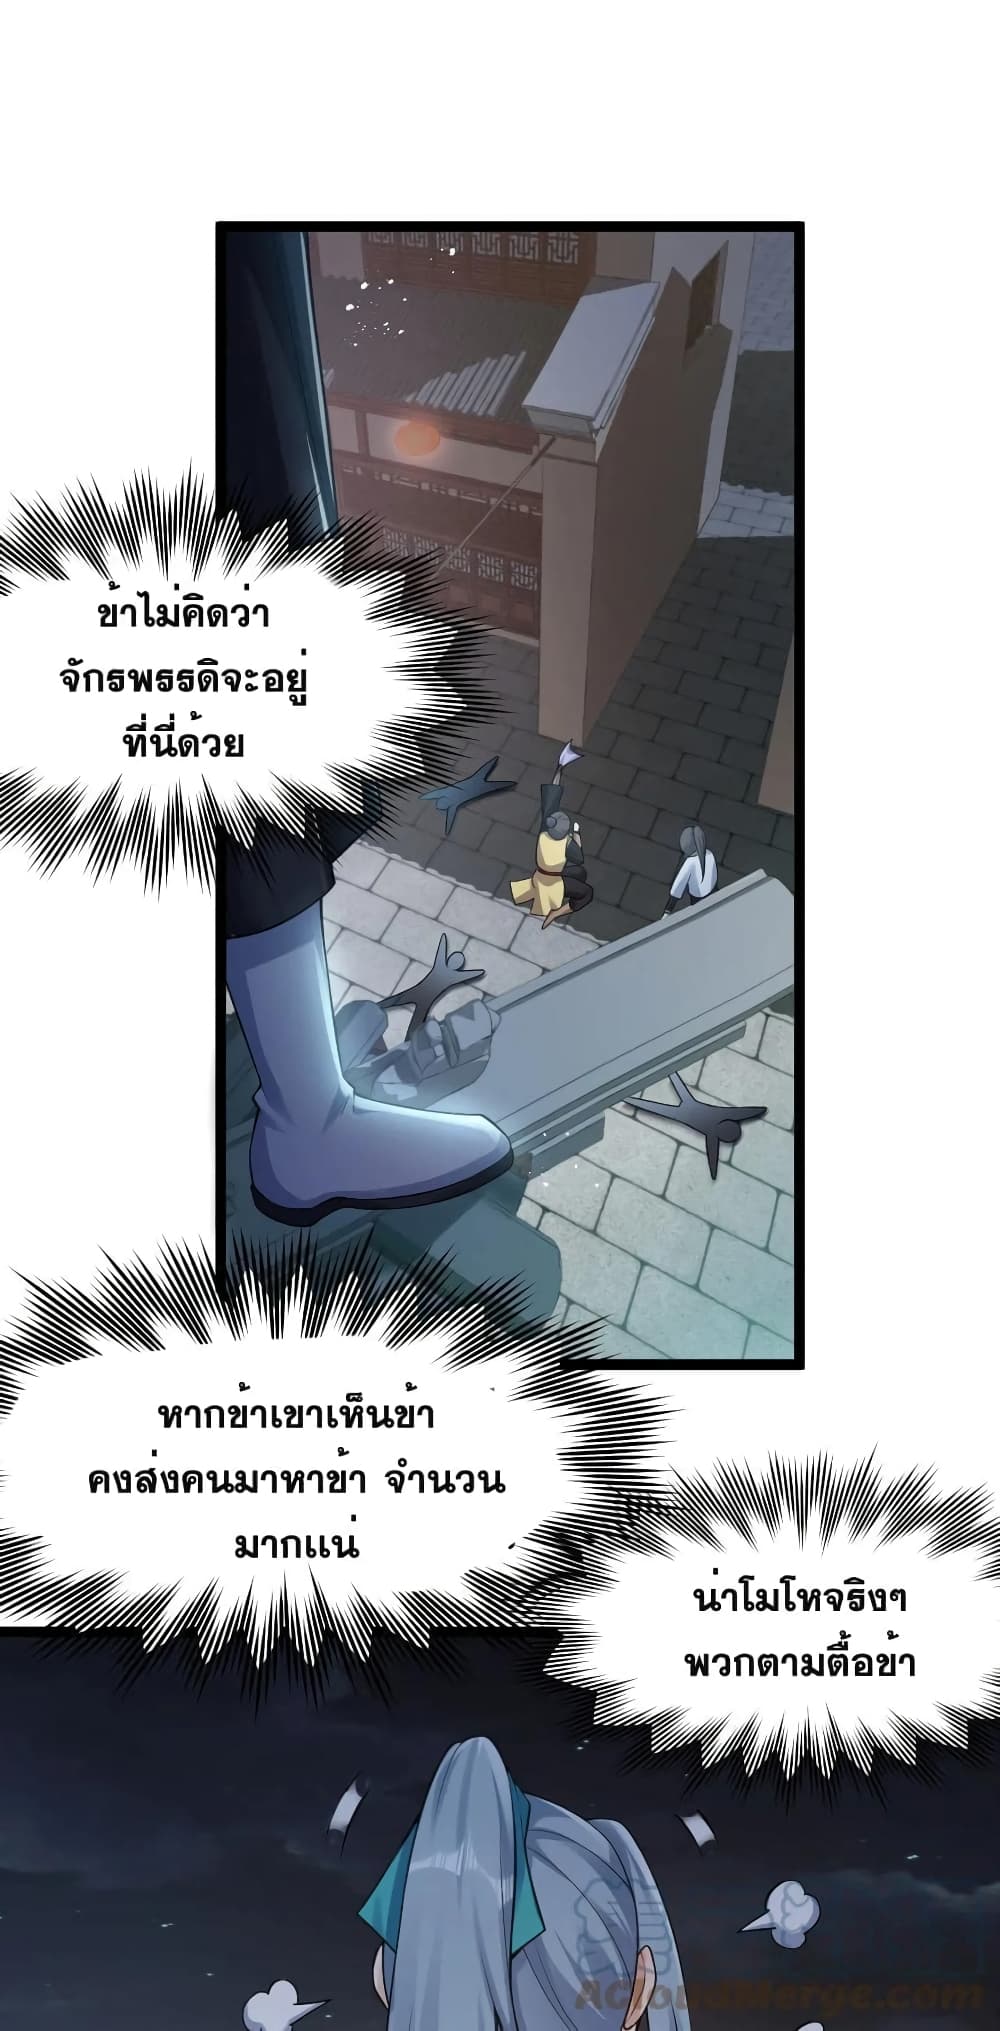 Godsian Masian from Another World ตอนที่ 107 (10)